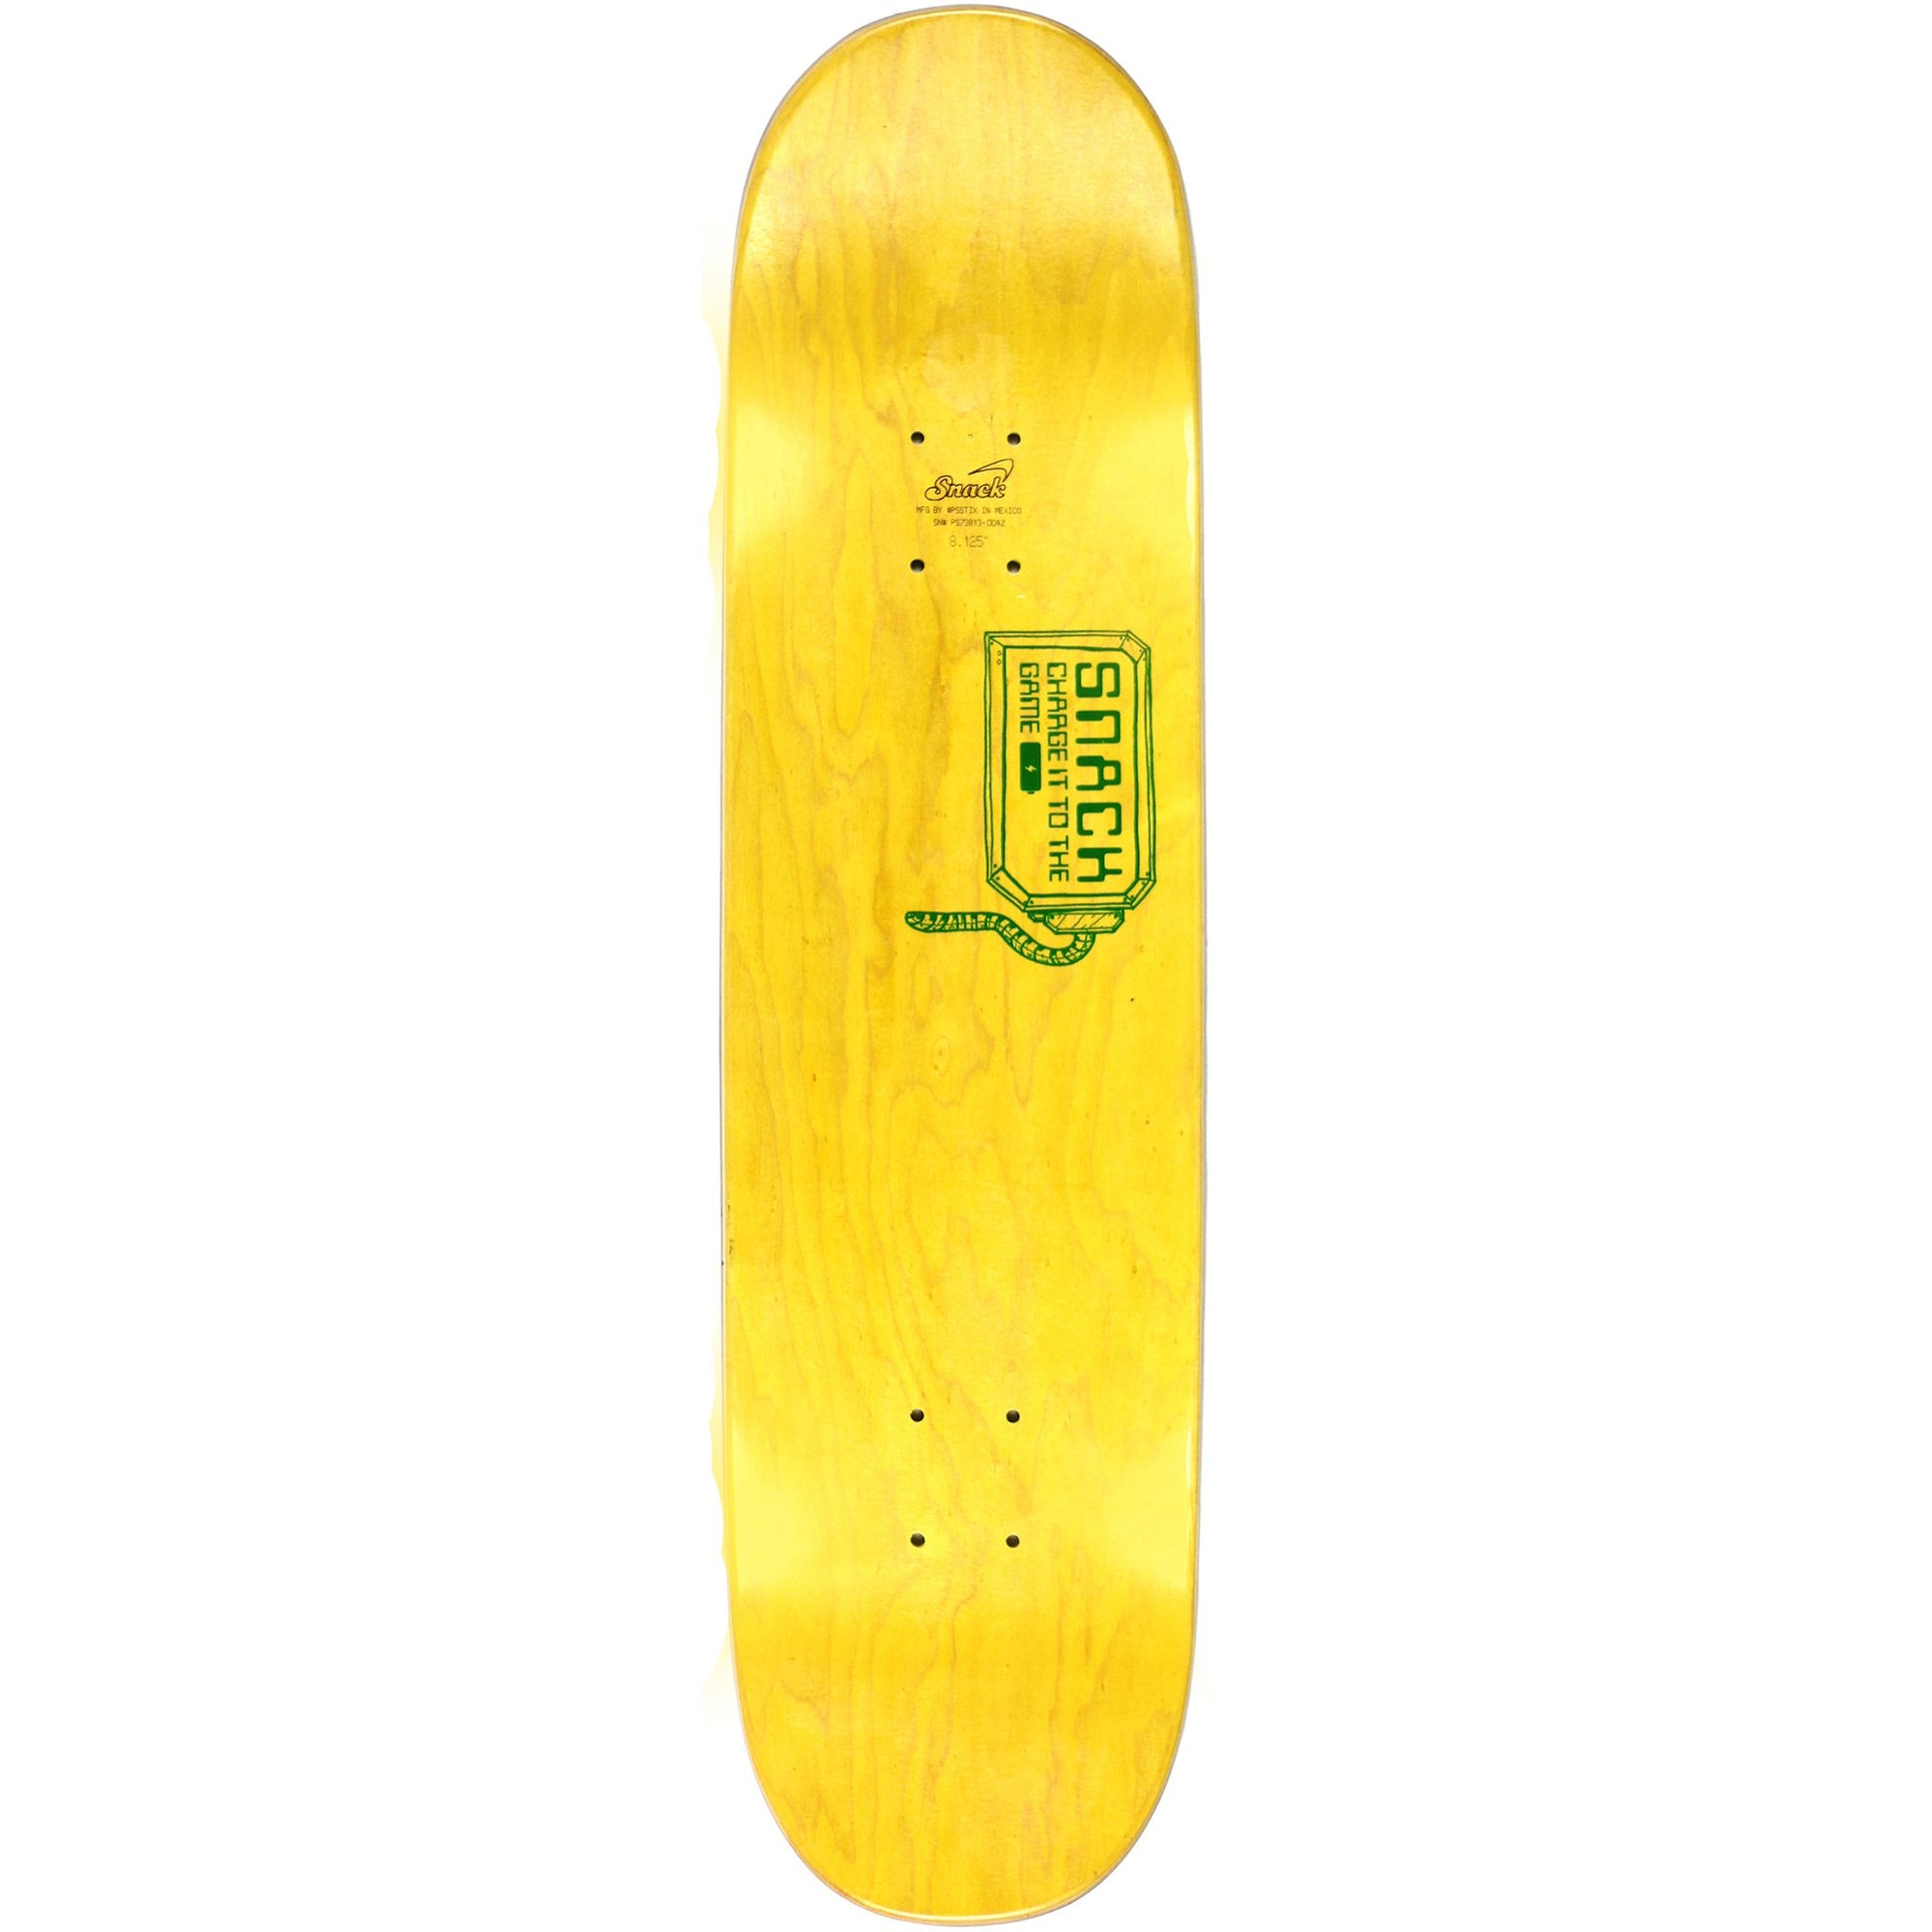 Snack G Kode Screen Deck 8.125" (Green Stain)